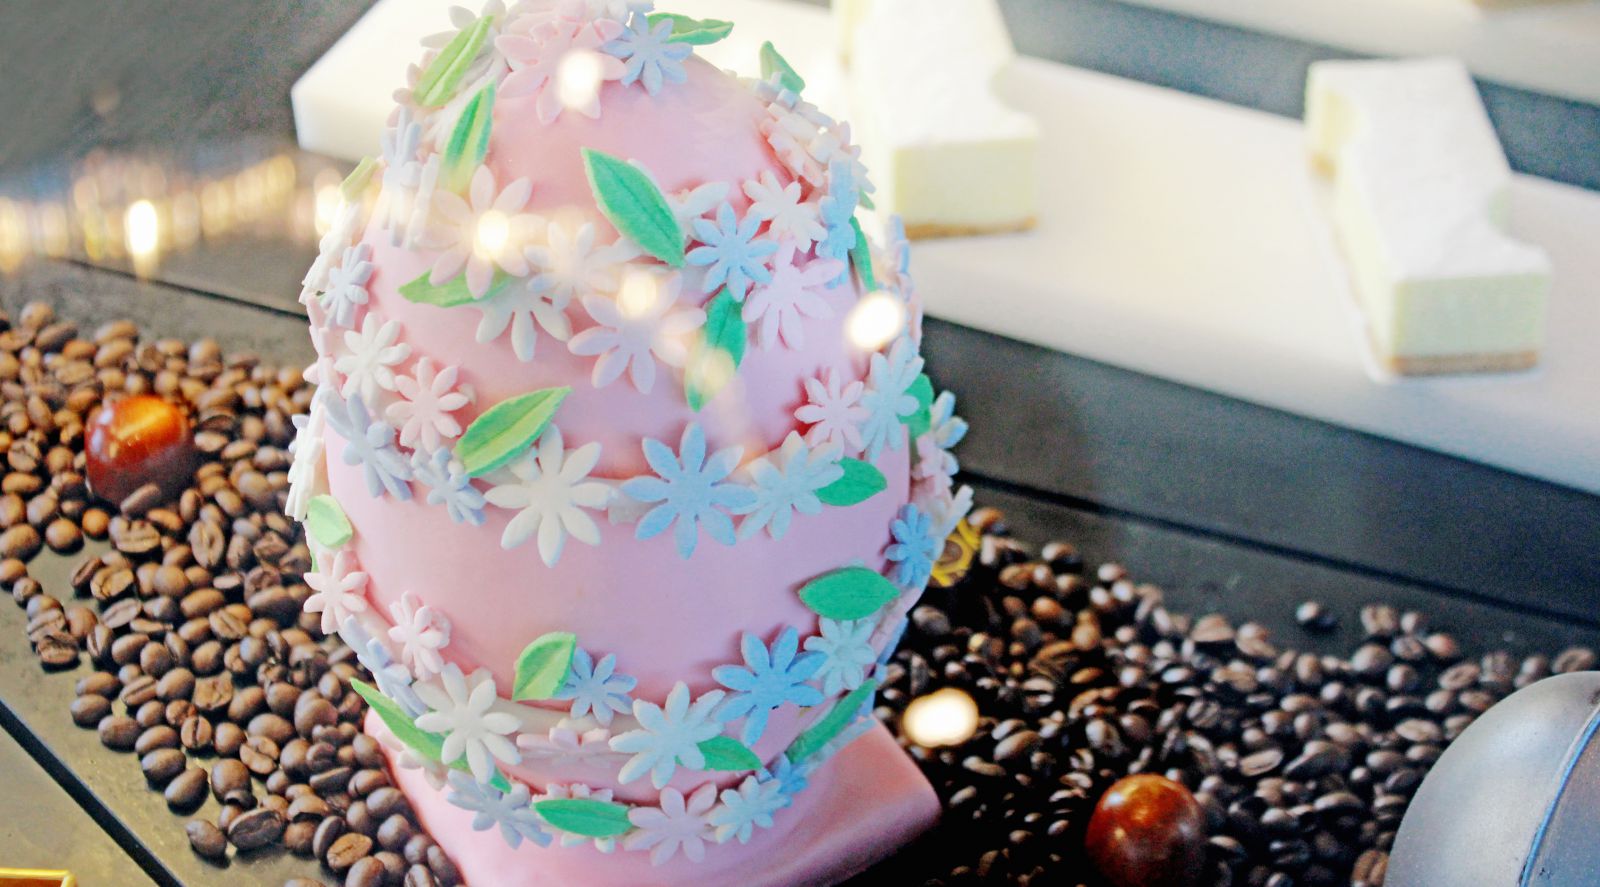 A decorated Easter egg.